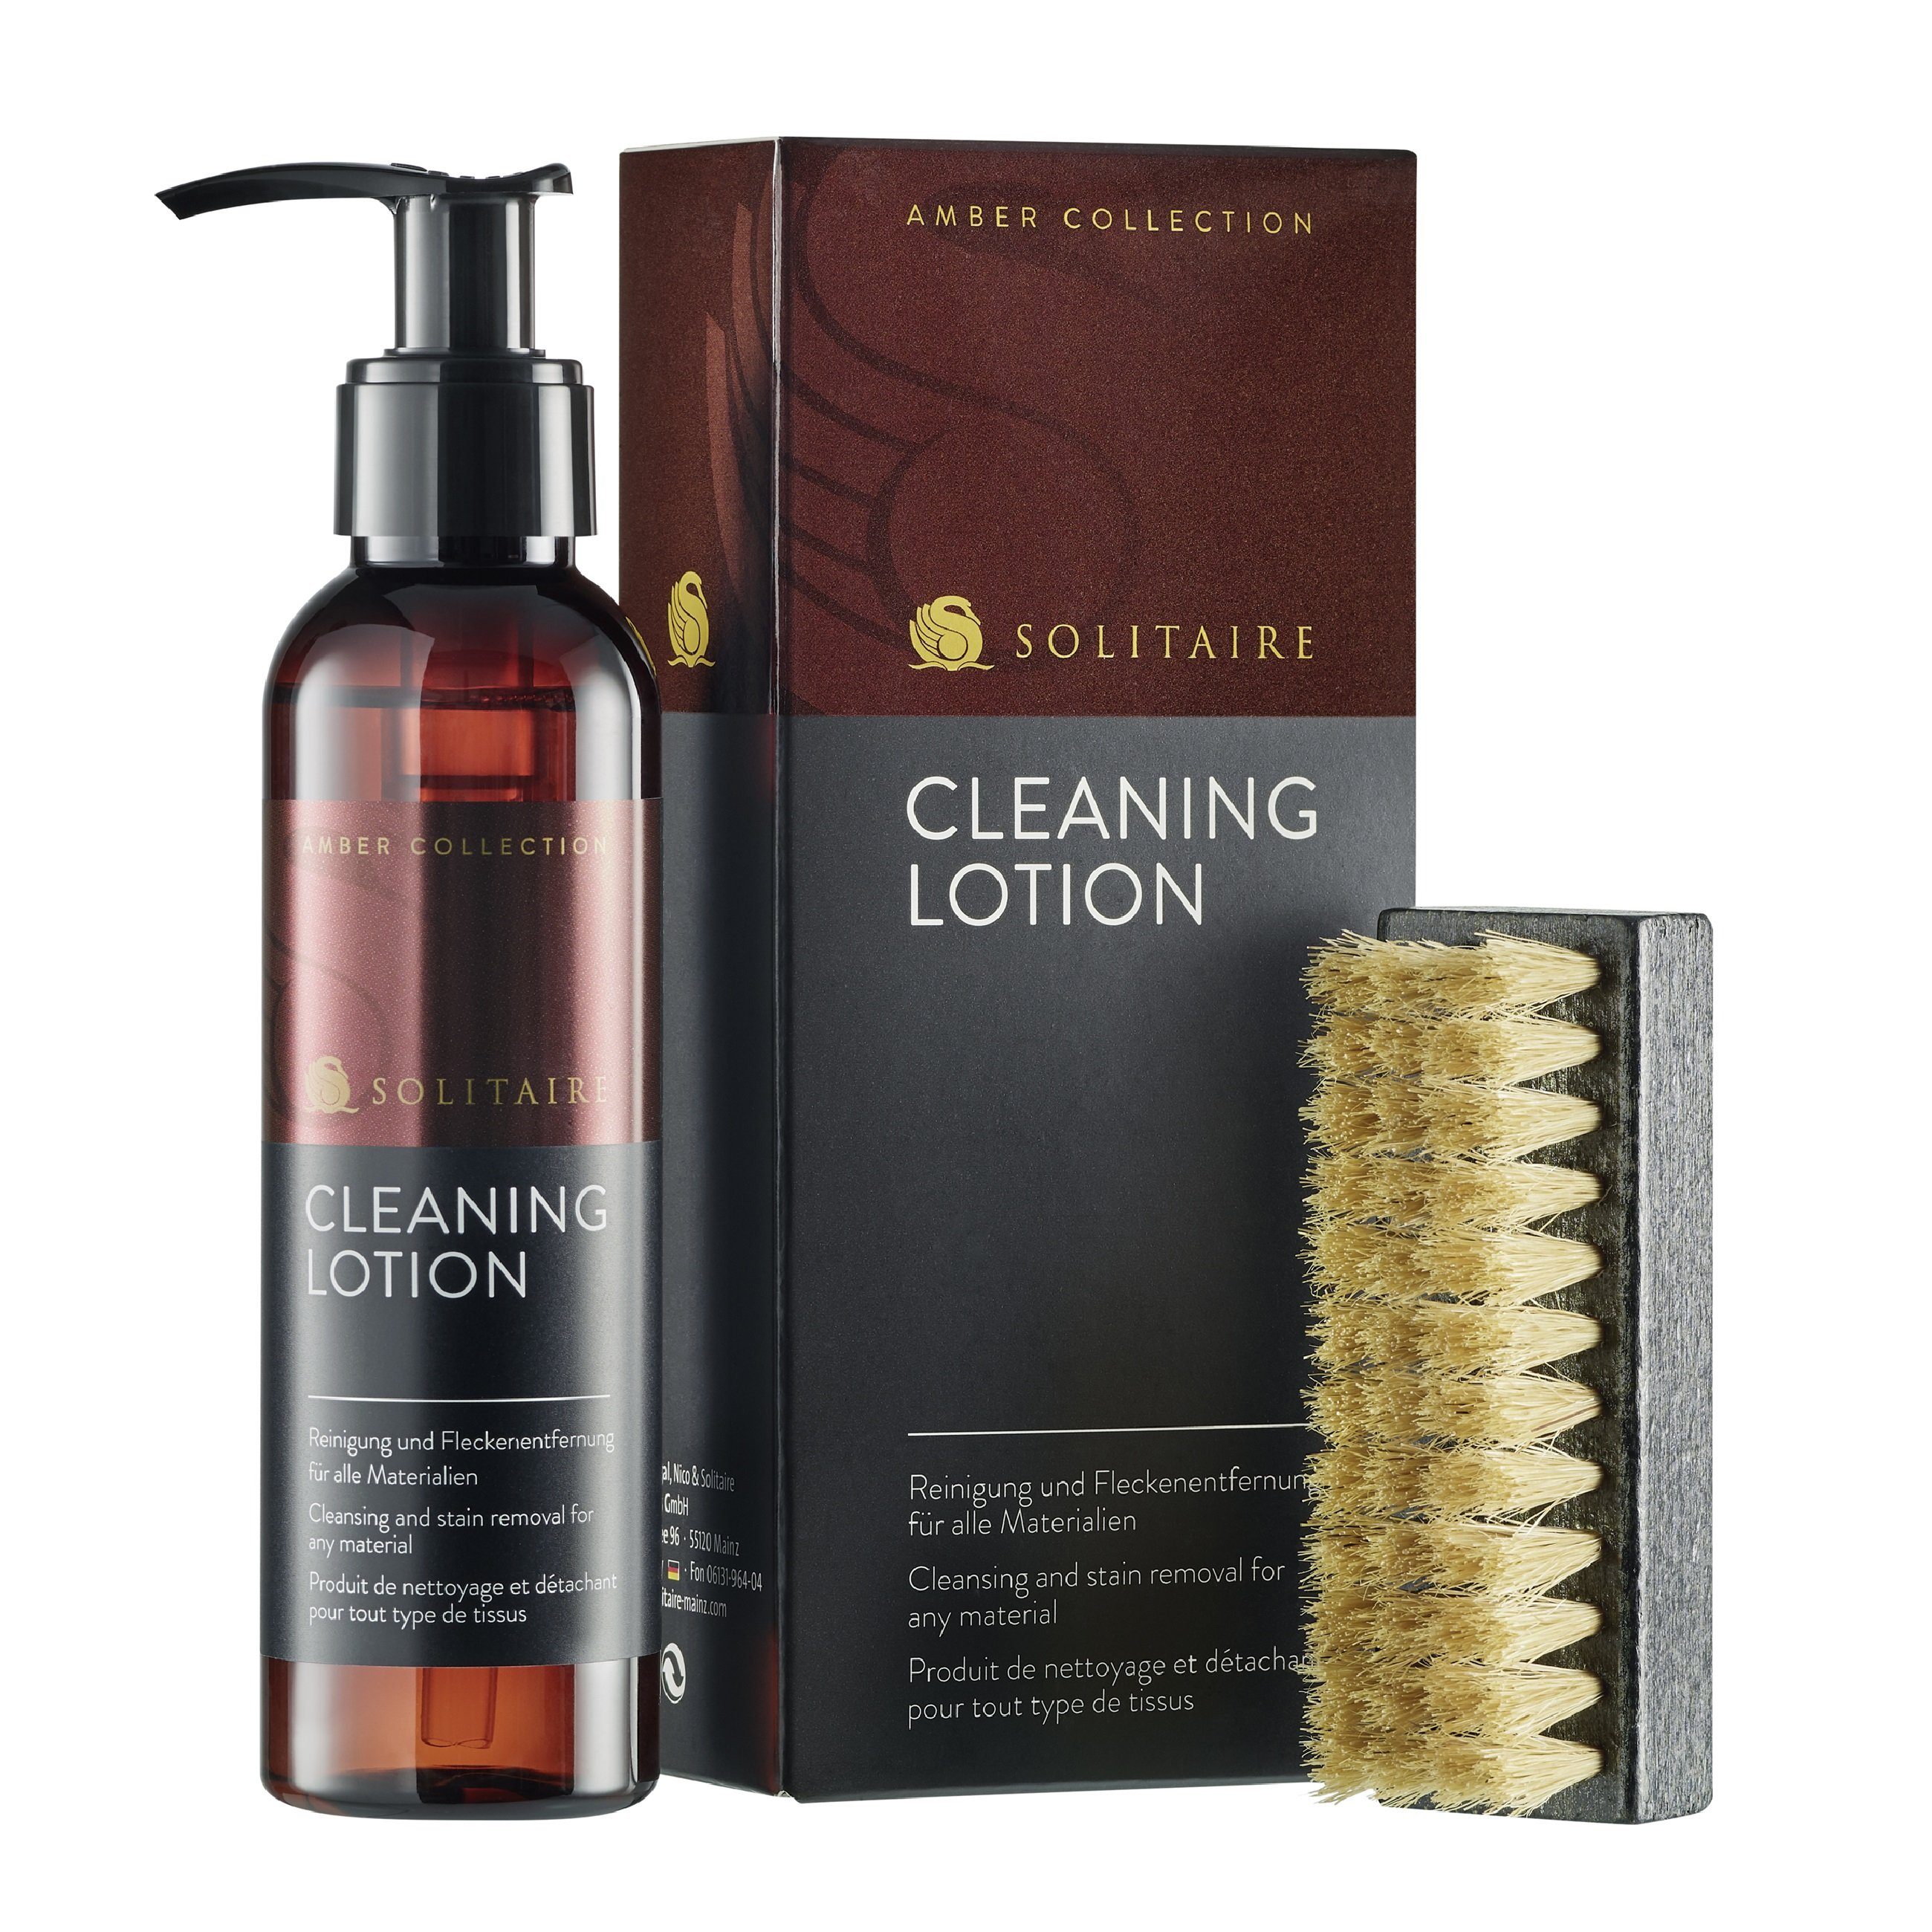 Solitaire Premium Amber Collection - Cleaning Lotion Set Schuhreiniger